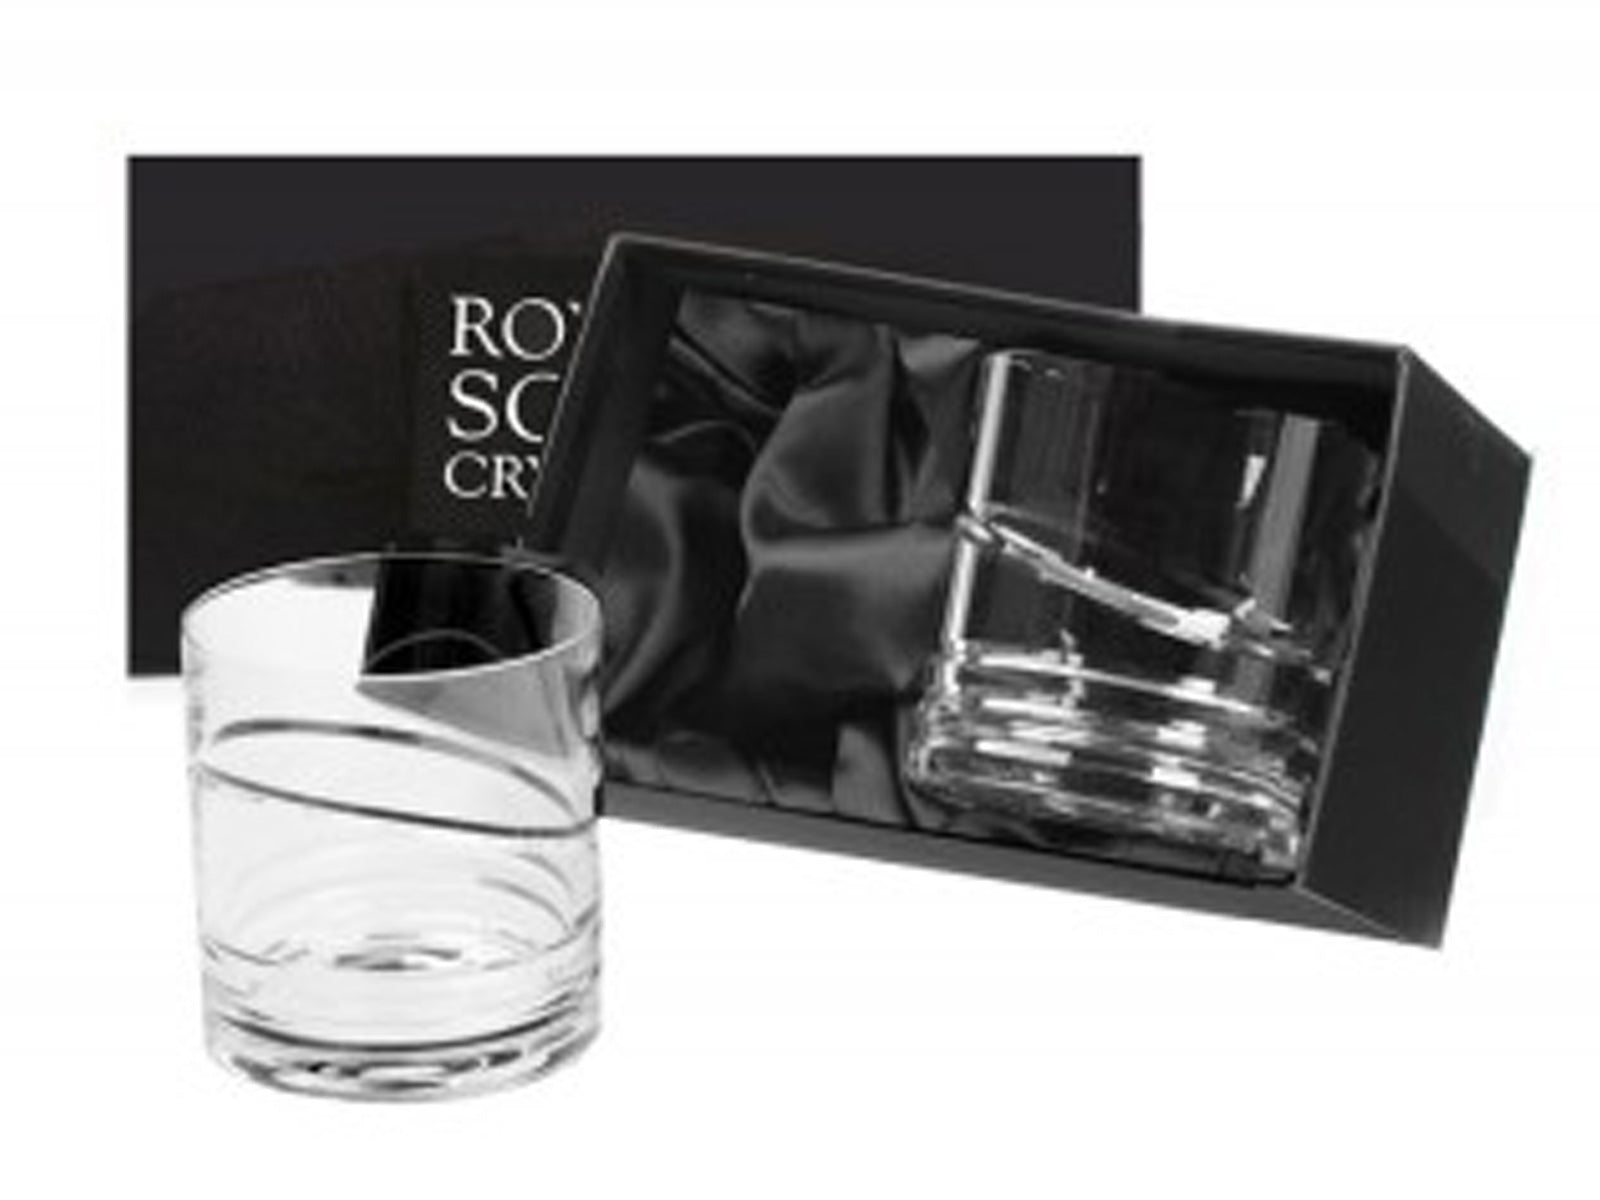 A pair of crystal tumblers with an orbital design around the outside, in a dark grey presentation box with silver branding on the lid